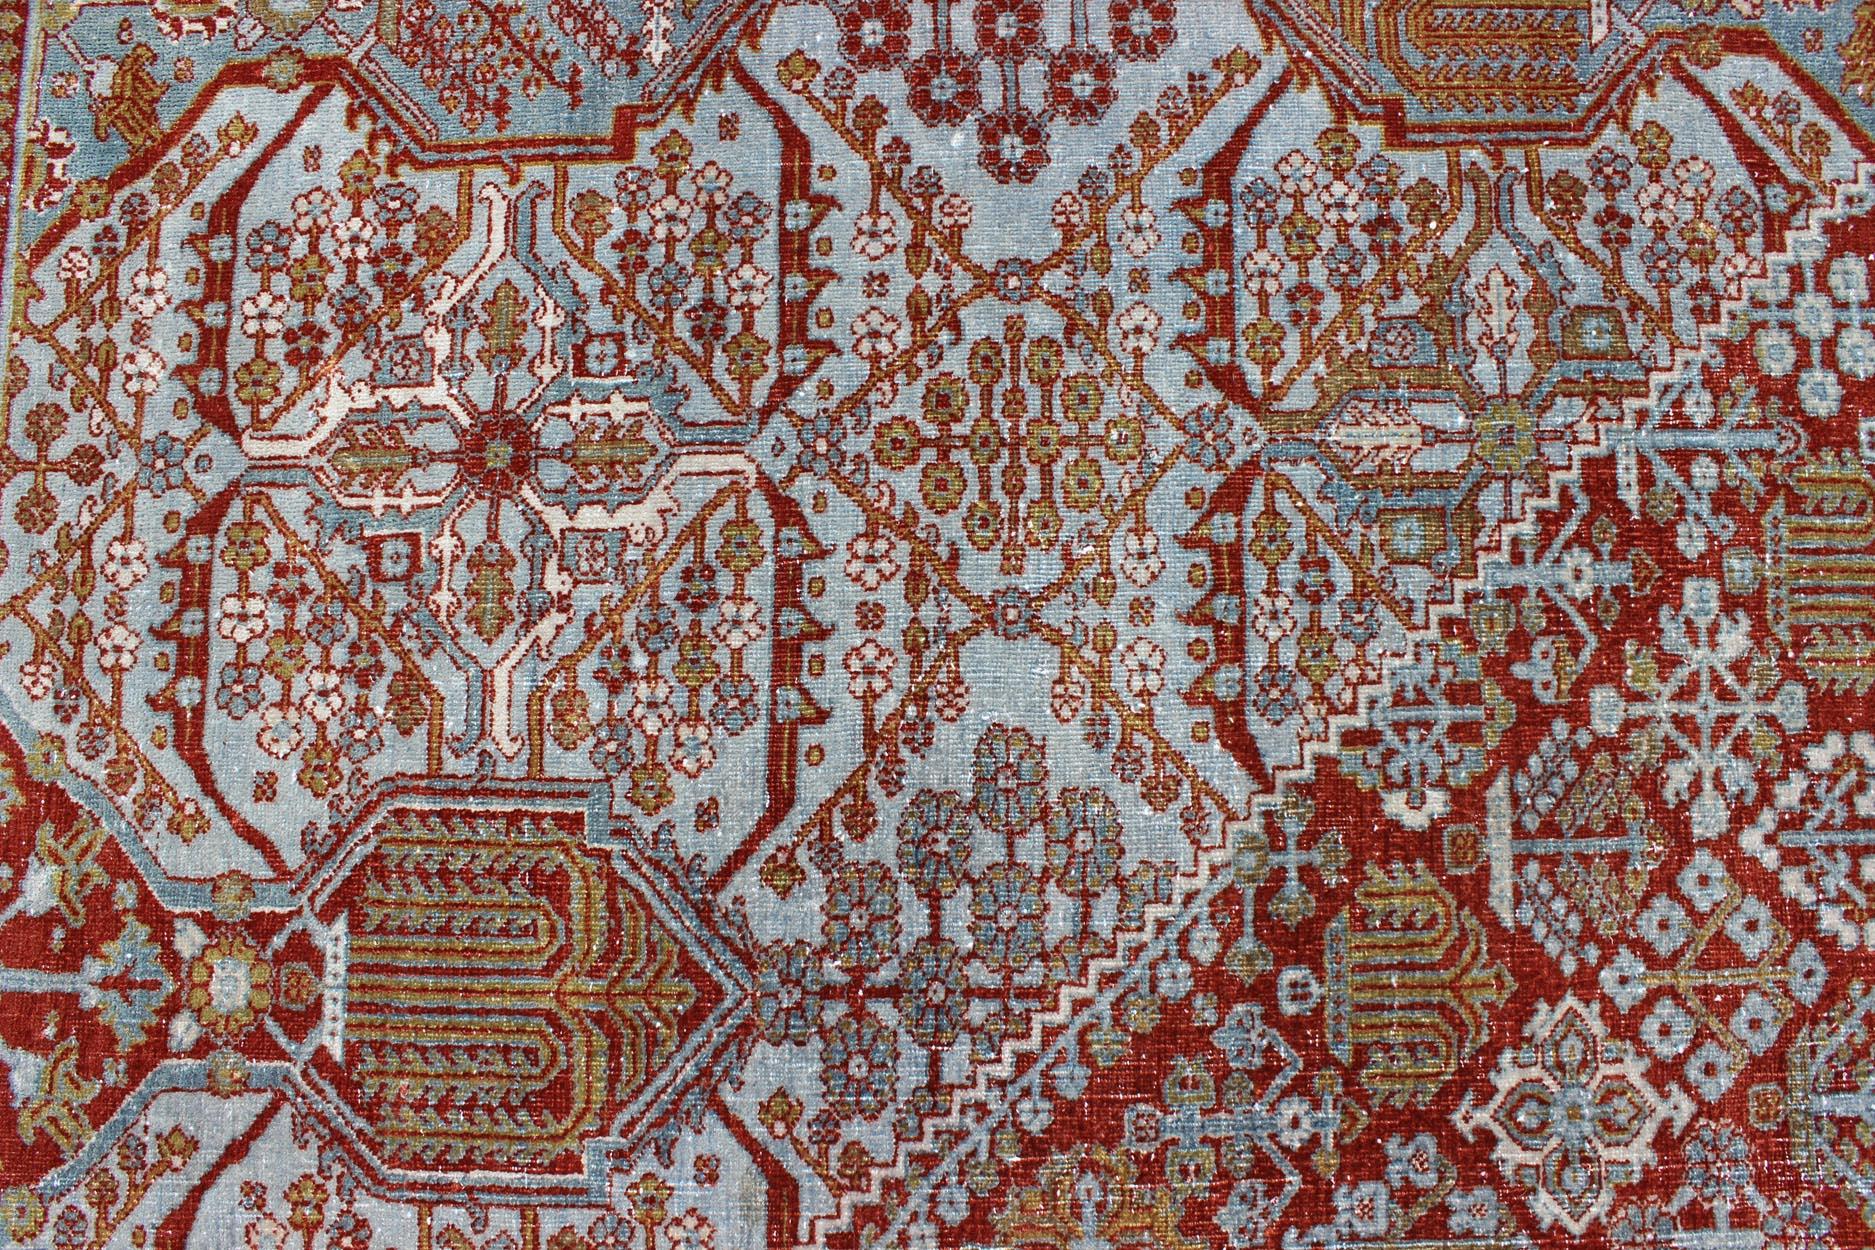 Tribal Large Antique Persian Joshegan Rug in Rust Red, Light Blue, Green, Gold & Olive For Sale